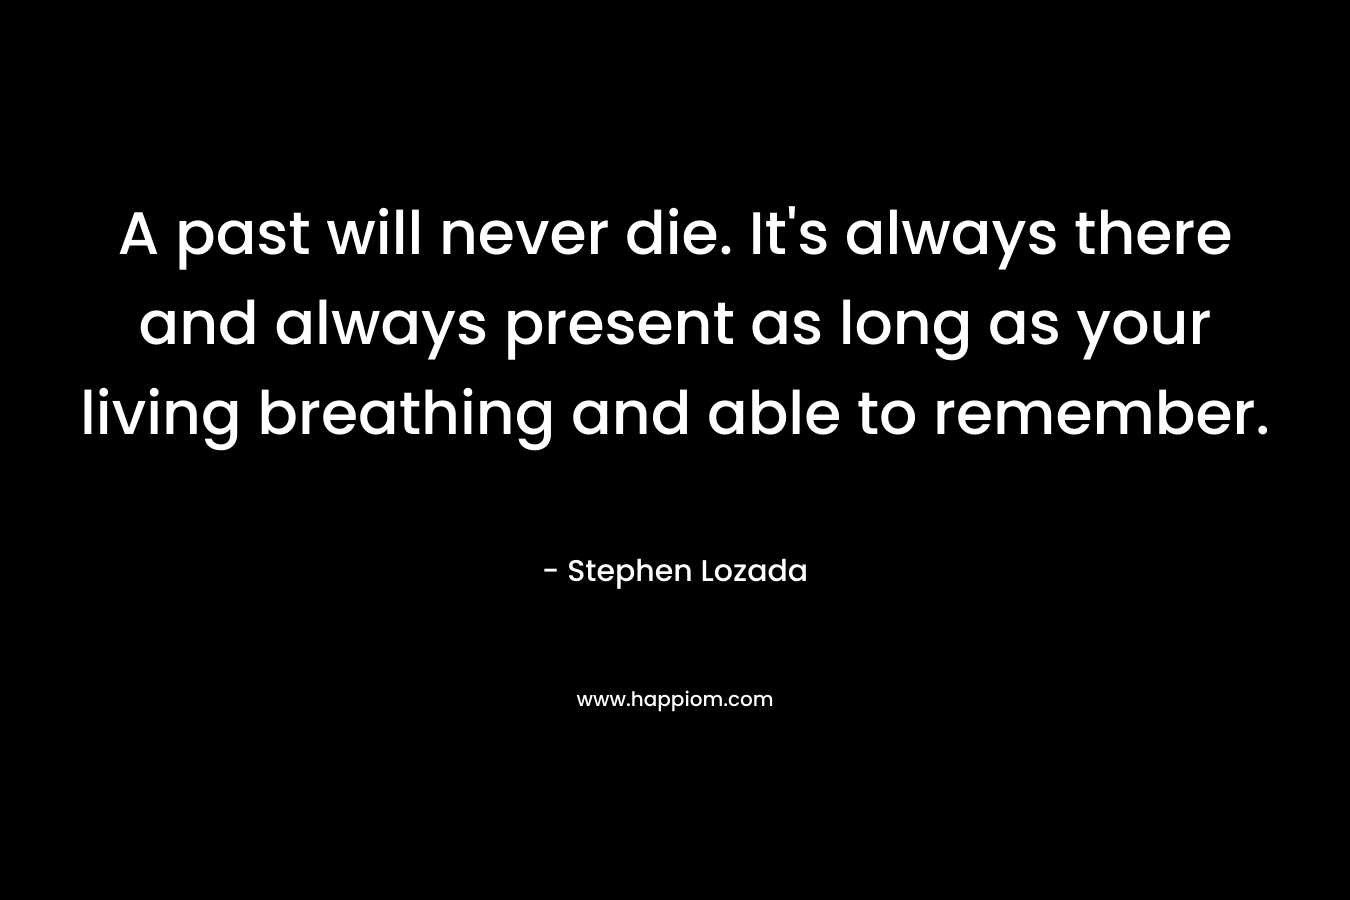 A past will never die. It's always there and always present as long as your living breathing and able to remember.